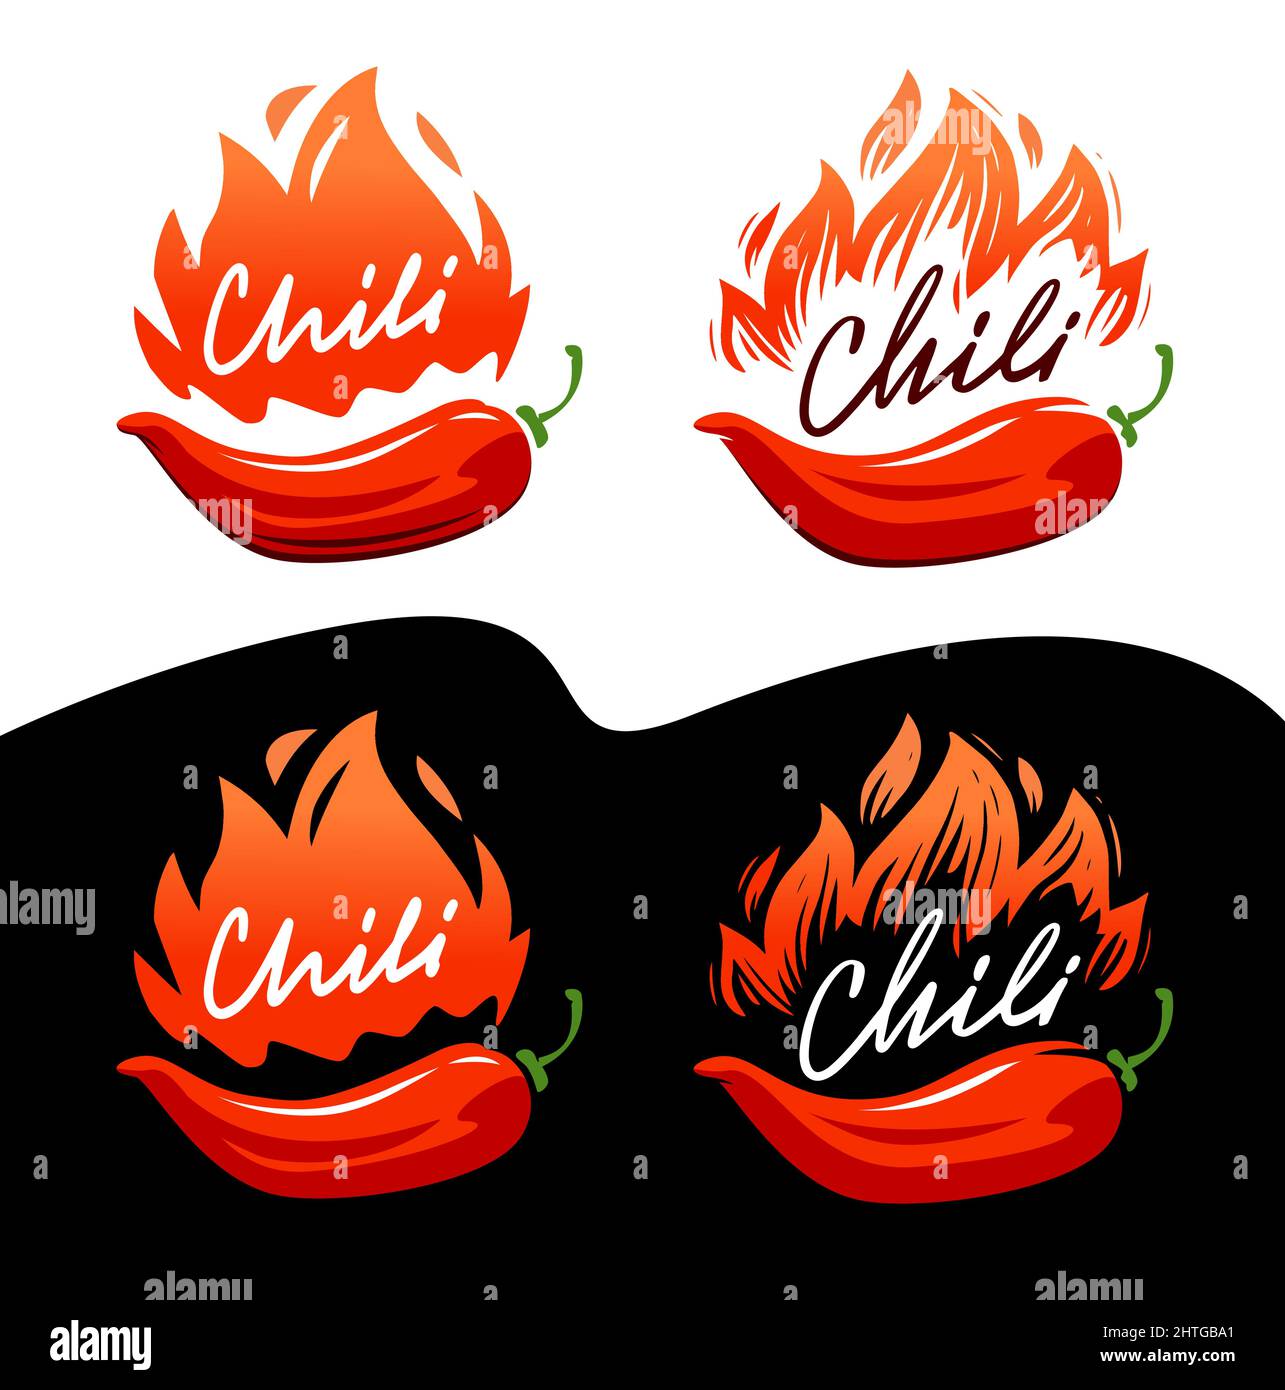 Chili logo with fire logo. Hot spicy pepper symbol. Vector illustration Stock Vector